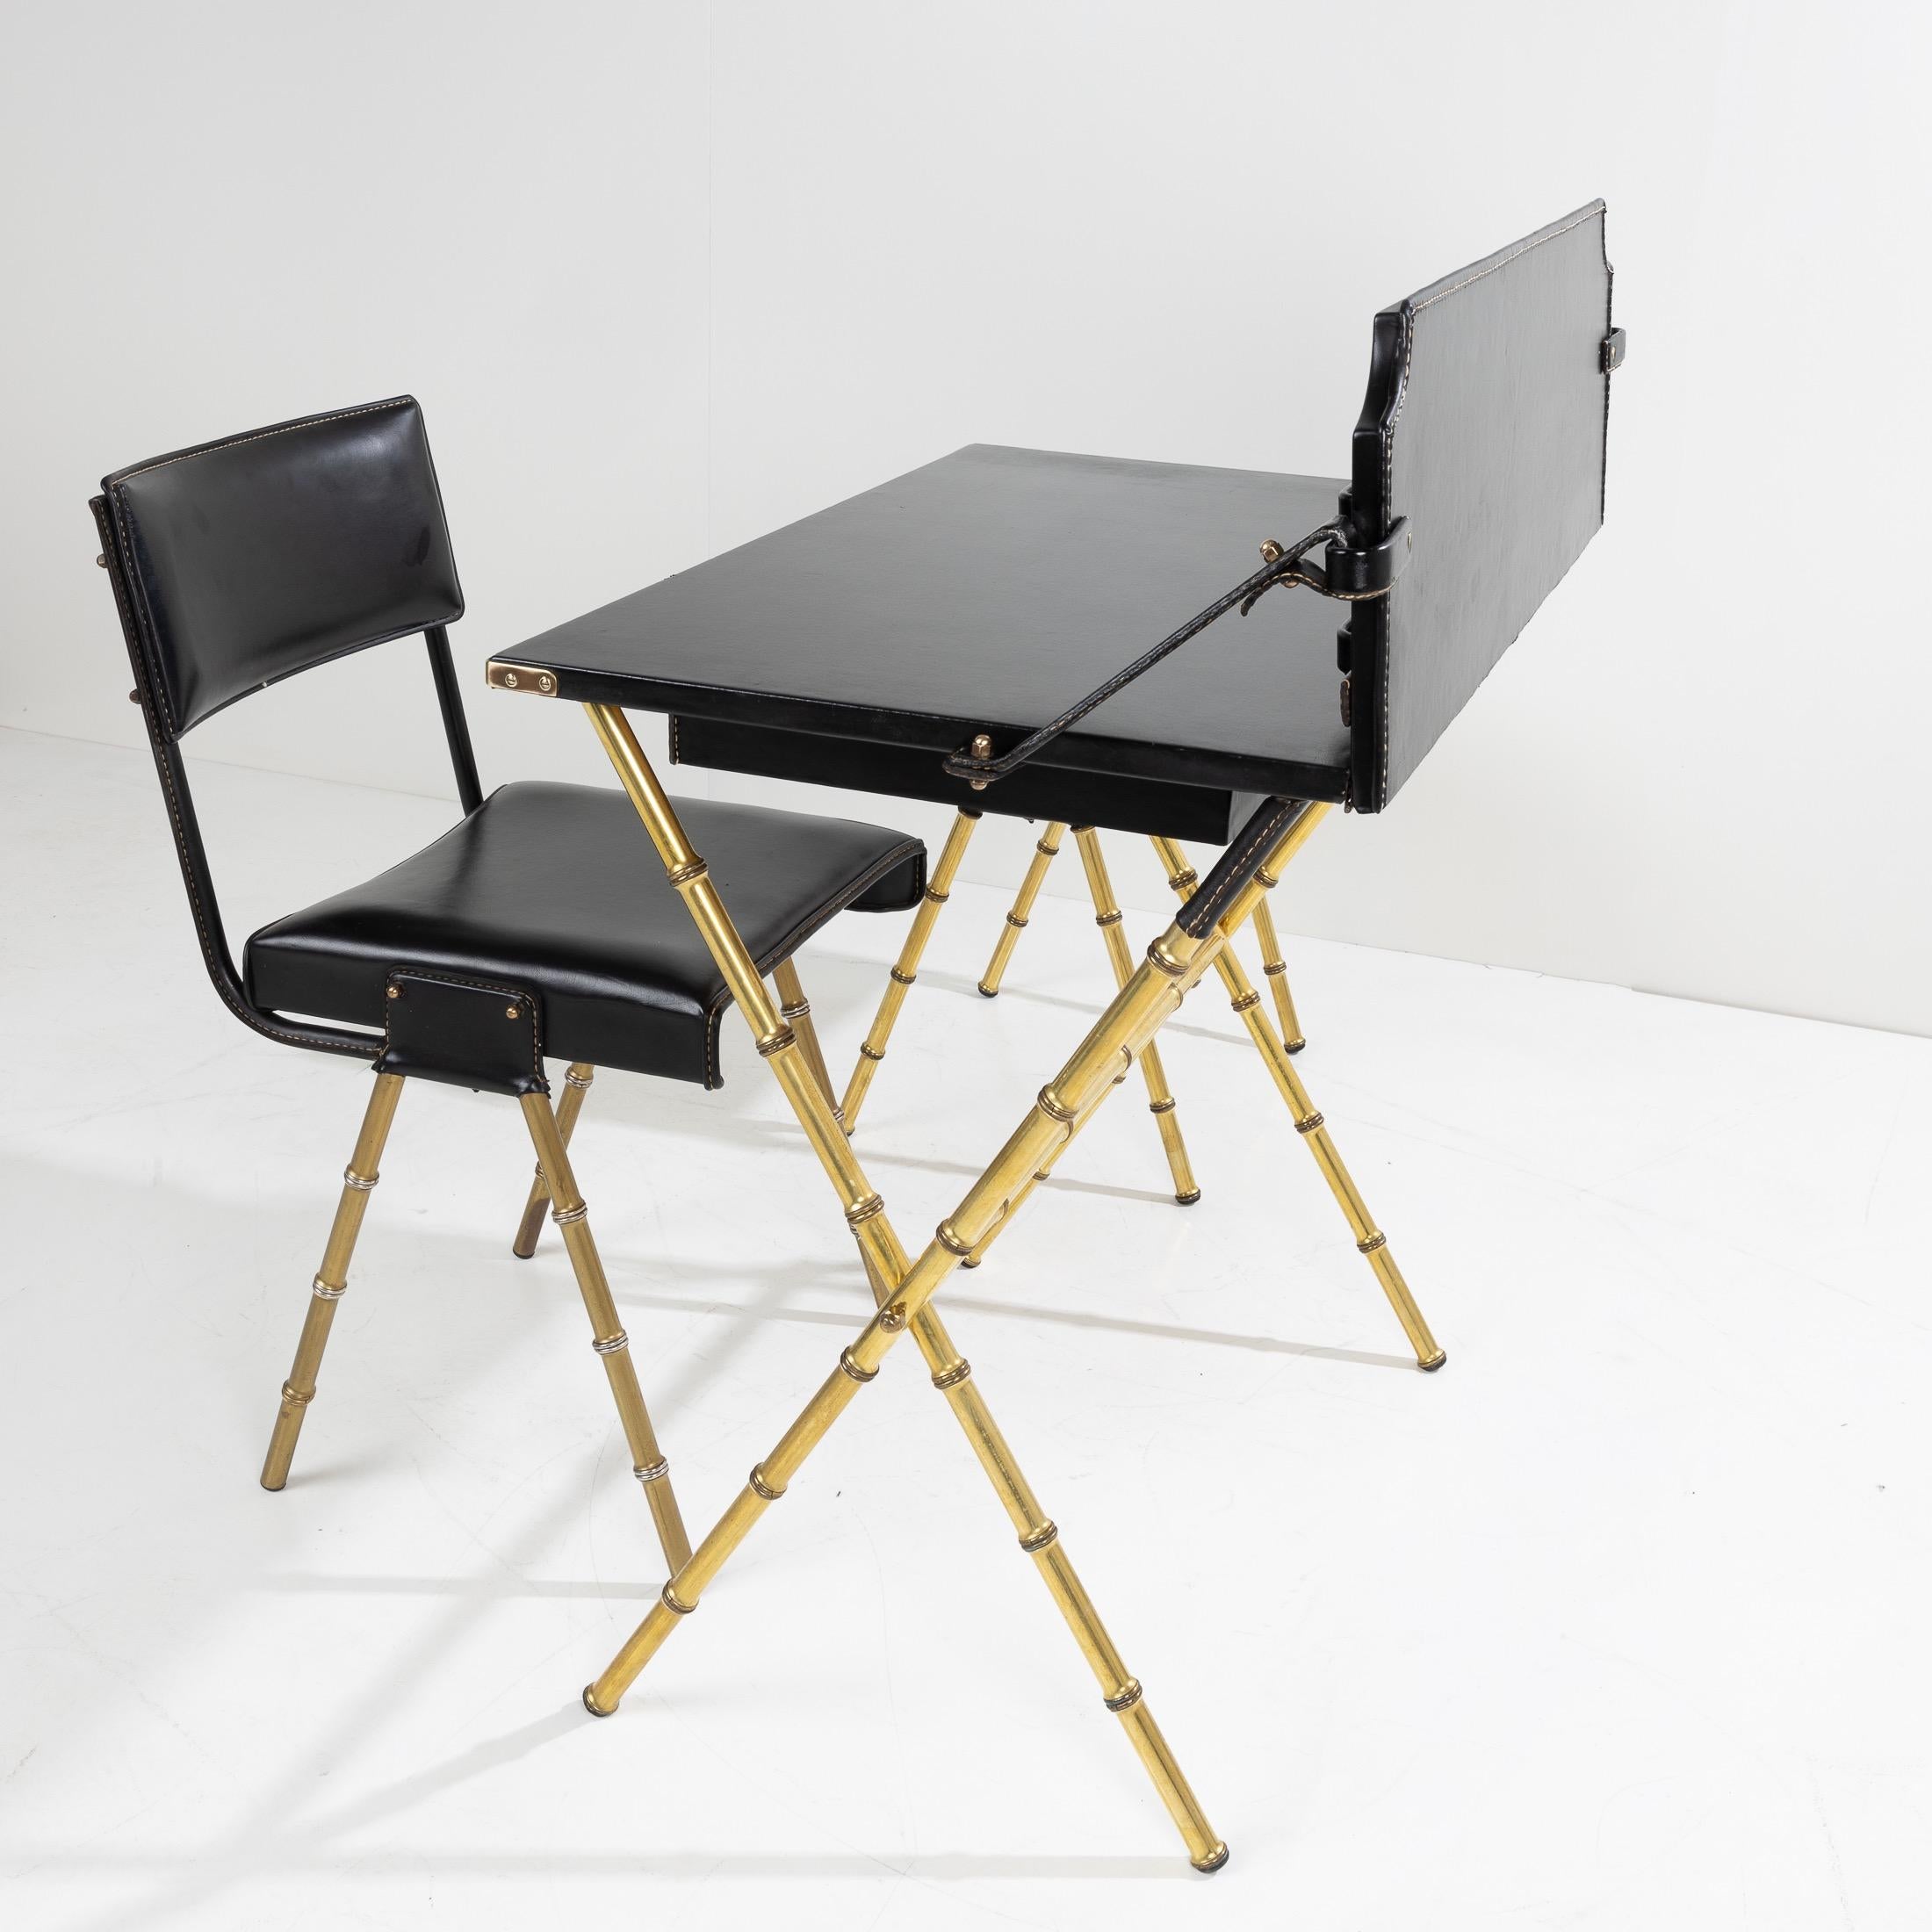 20th Century Drop-Leaf Desk with Its Seat and Visitor’s Stool by Jacques Adnet